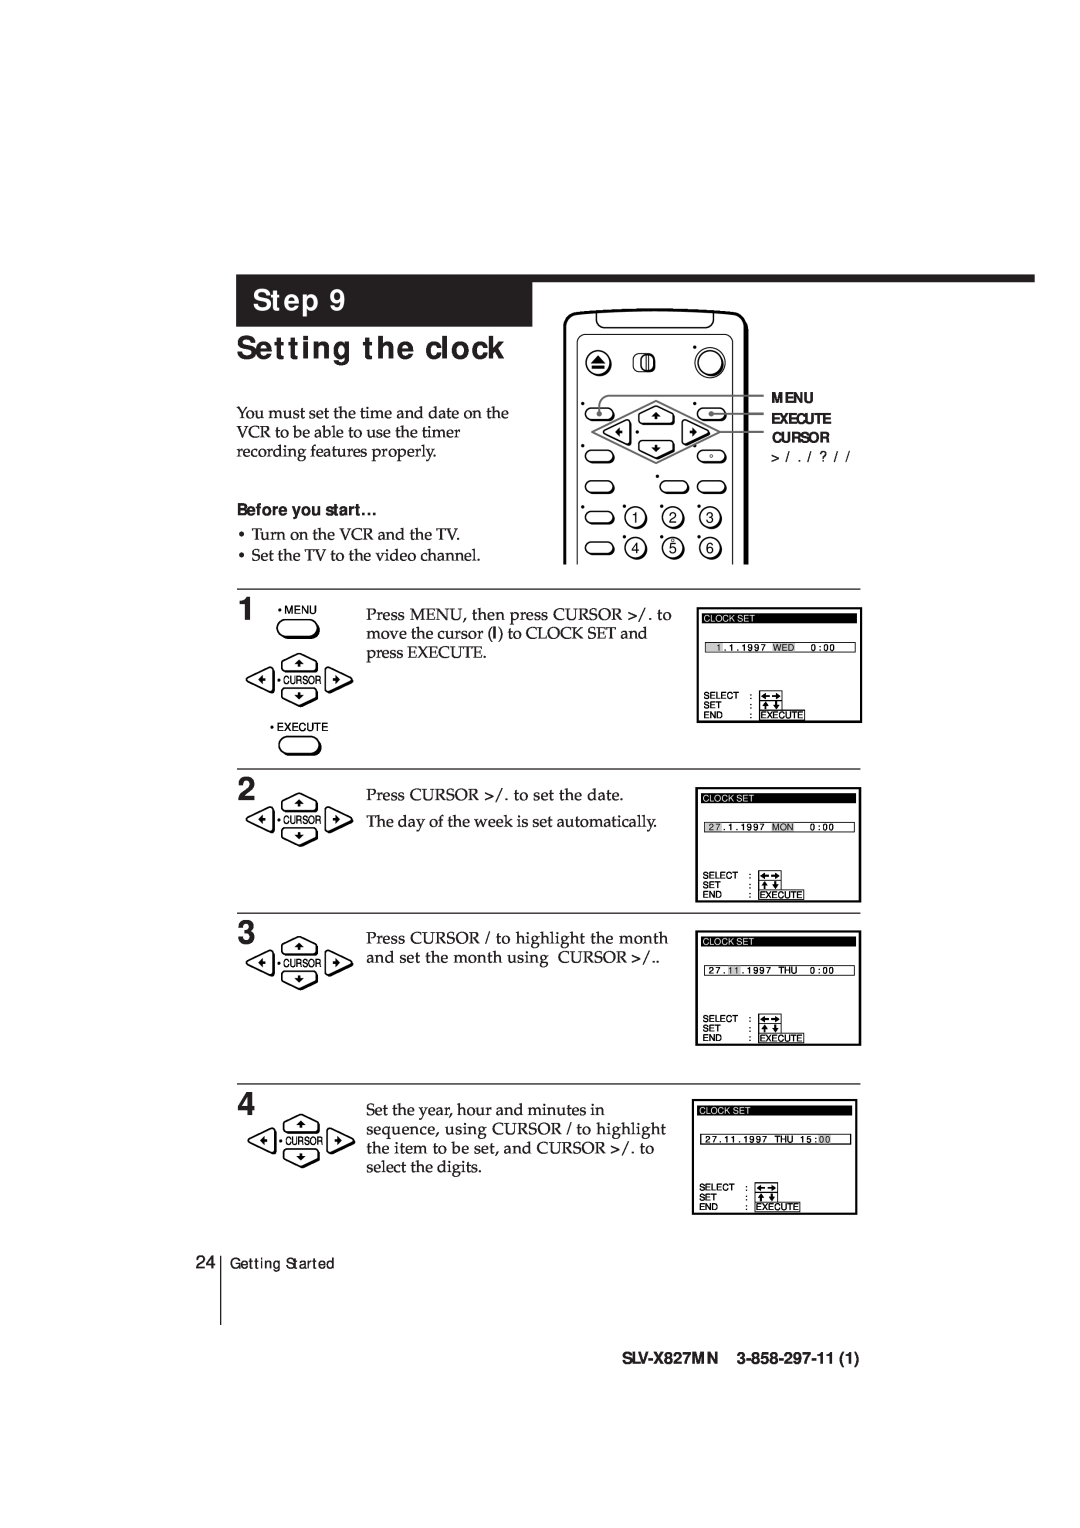 Sony manual Setting the clock, Step, Before you start…, SLV-X827MN 3-858-297-11, ? 1 2 4 5 